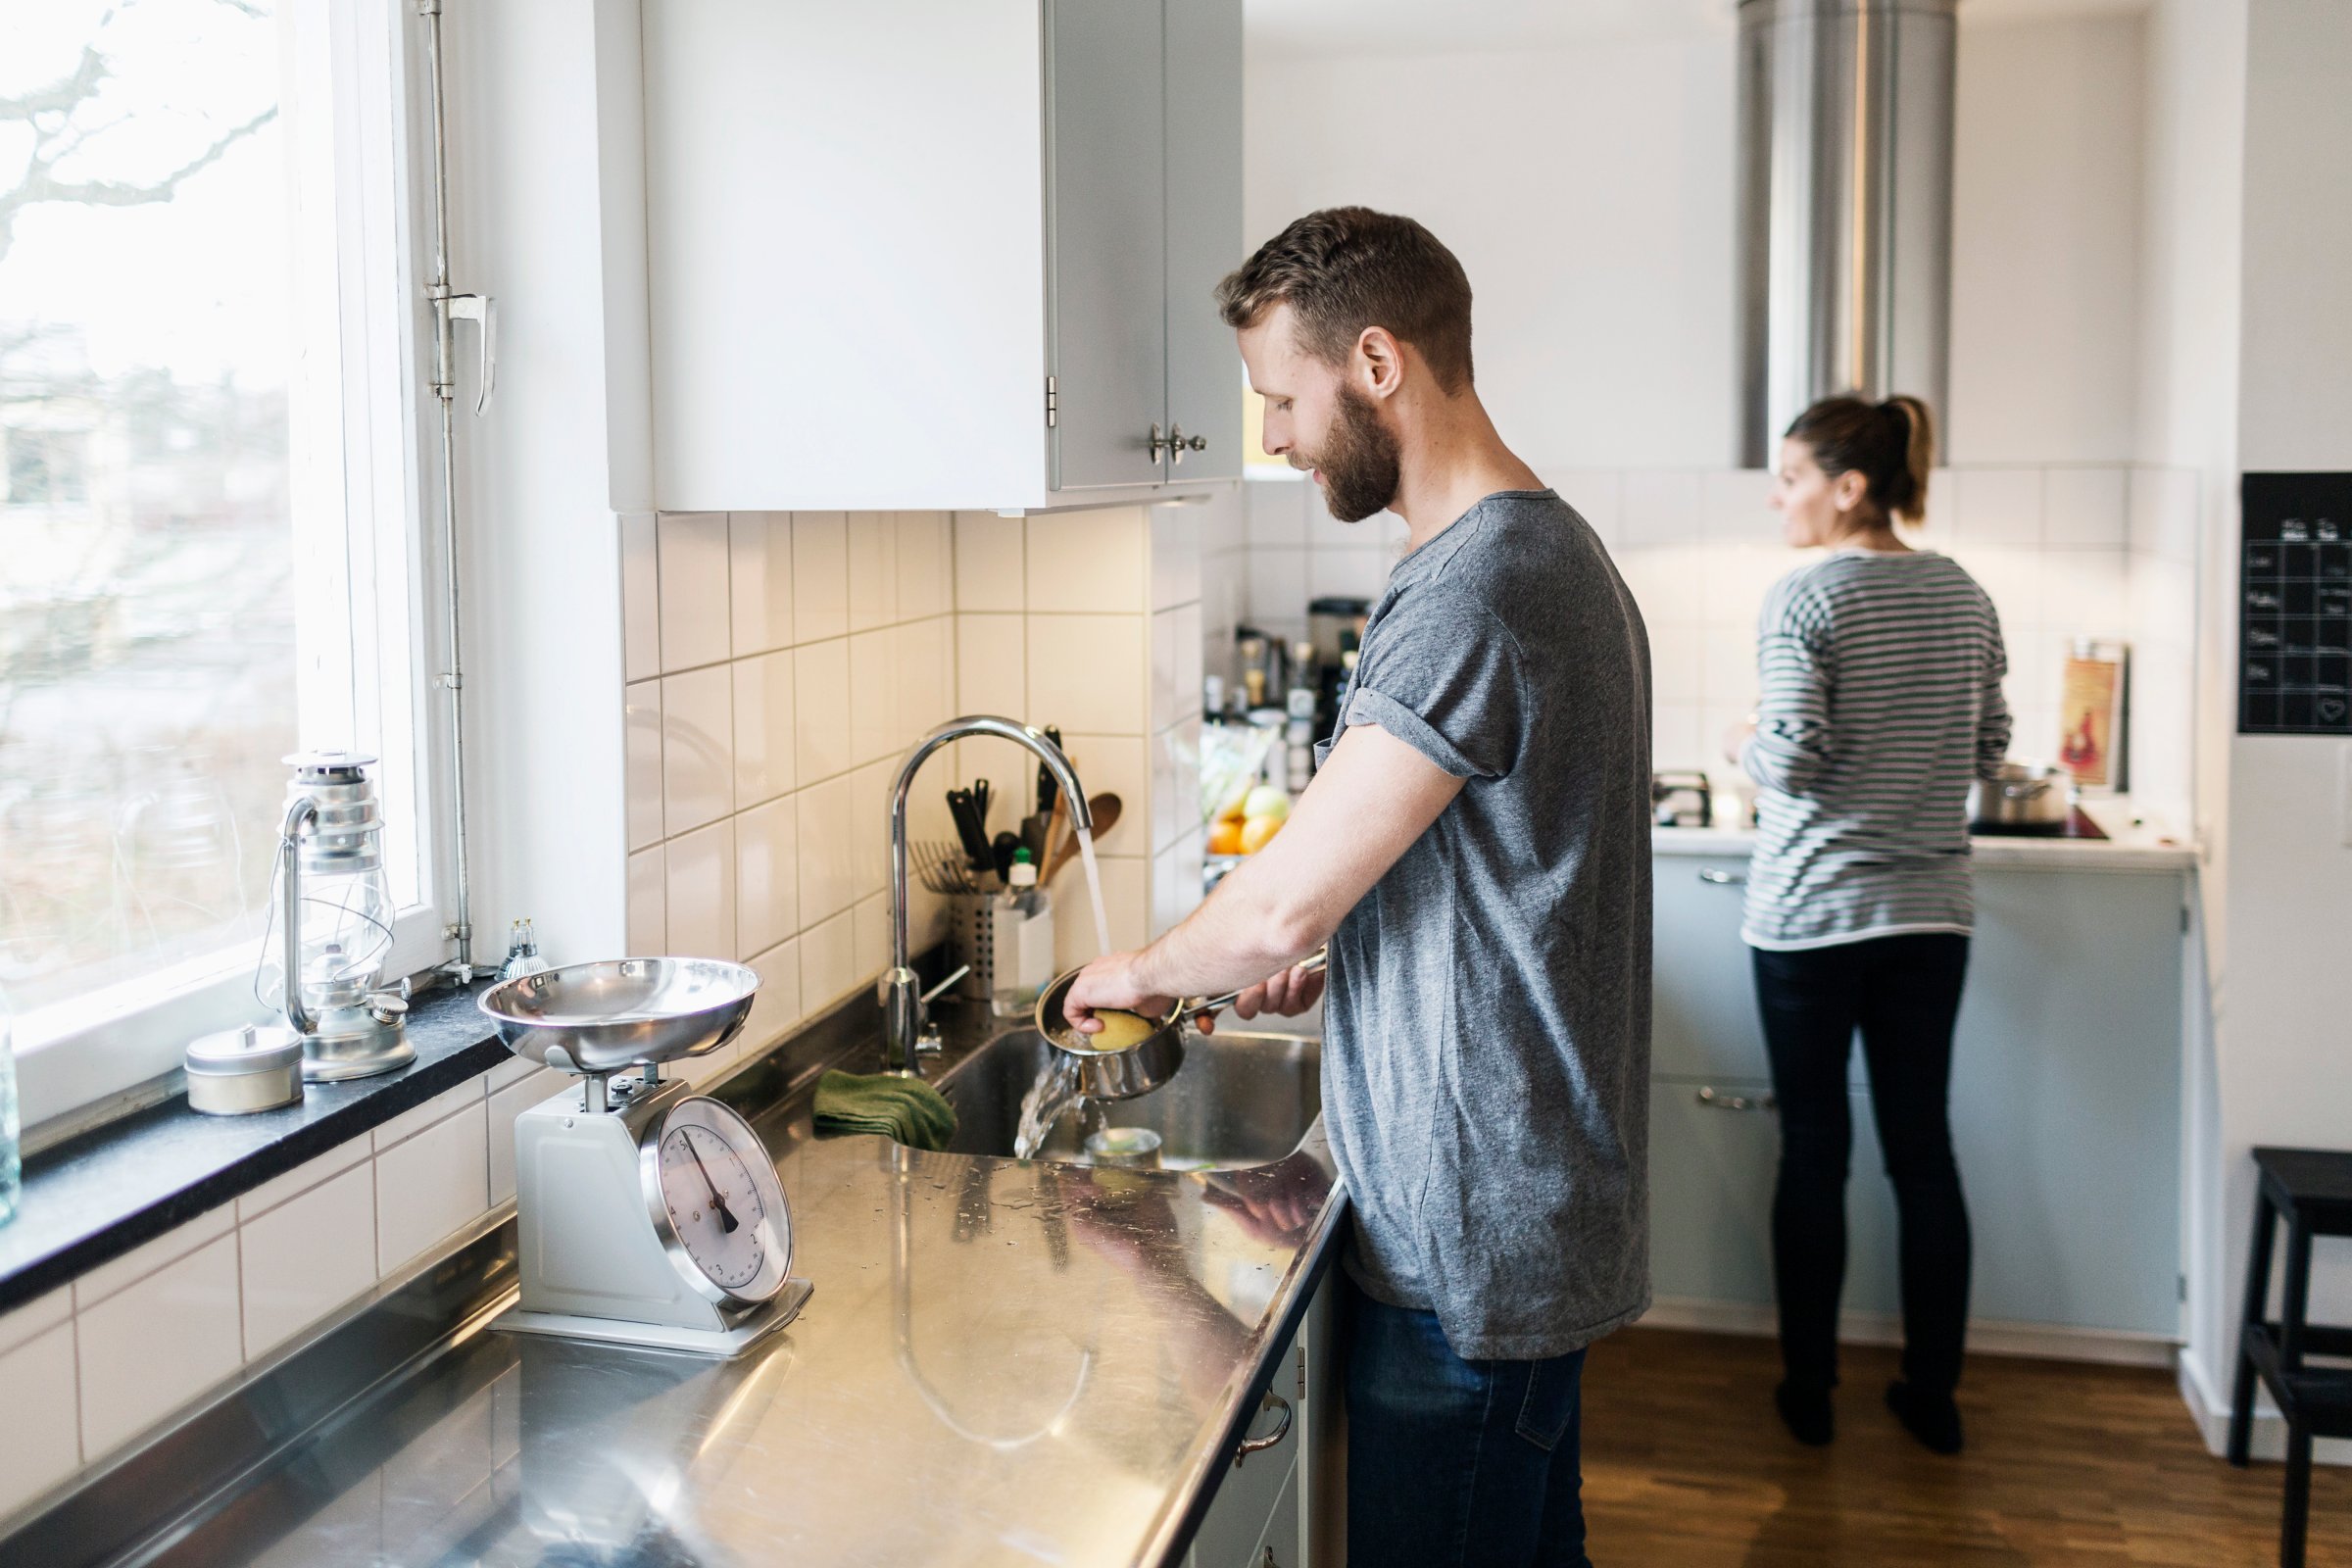 Man washing sauce pan while woman standing in background in kitchen